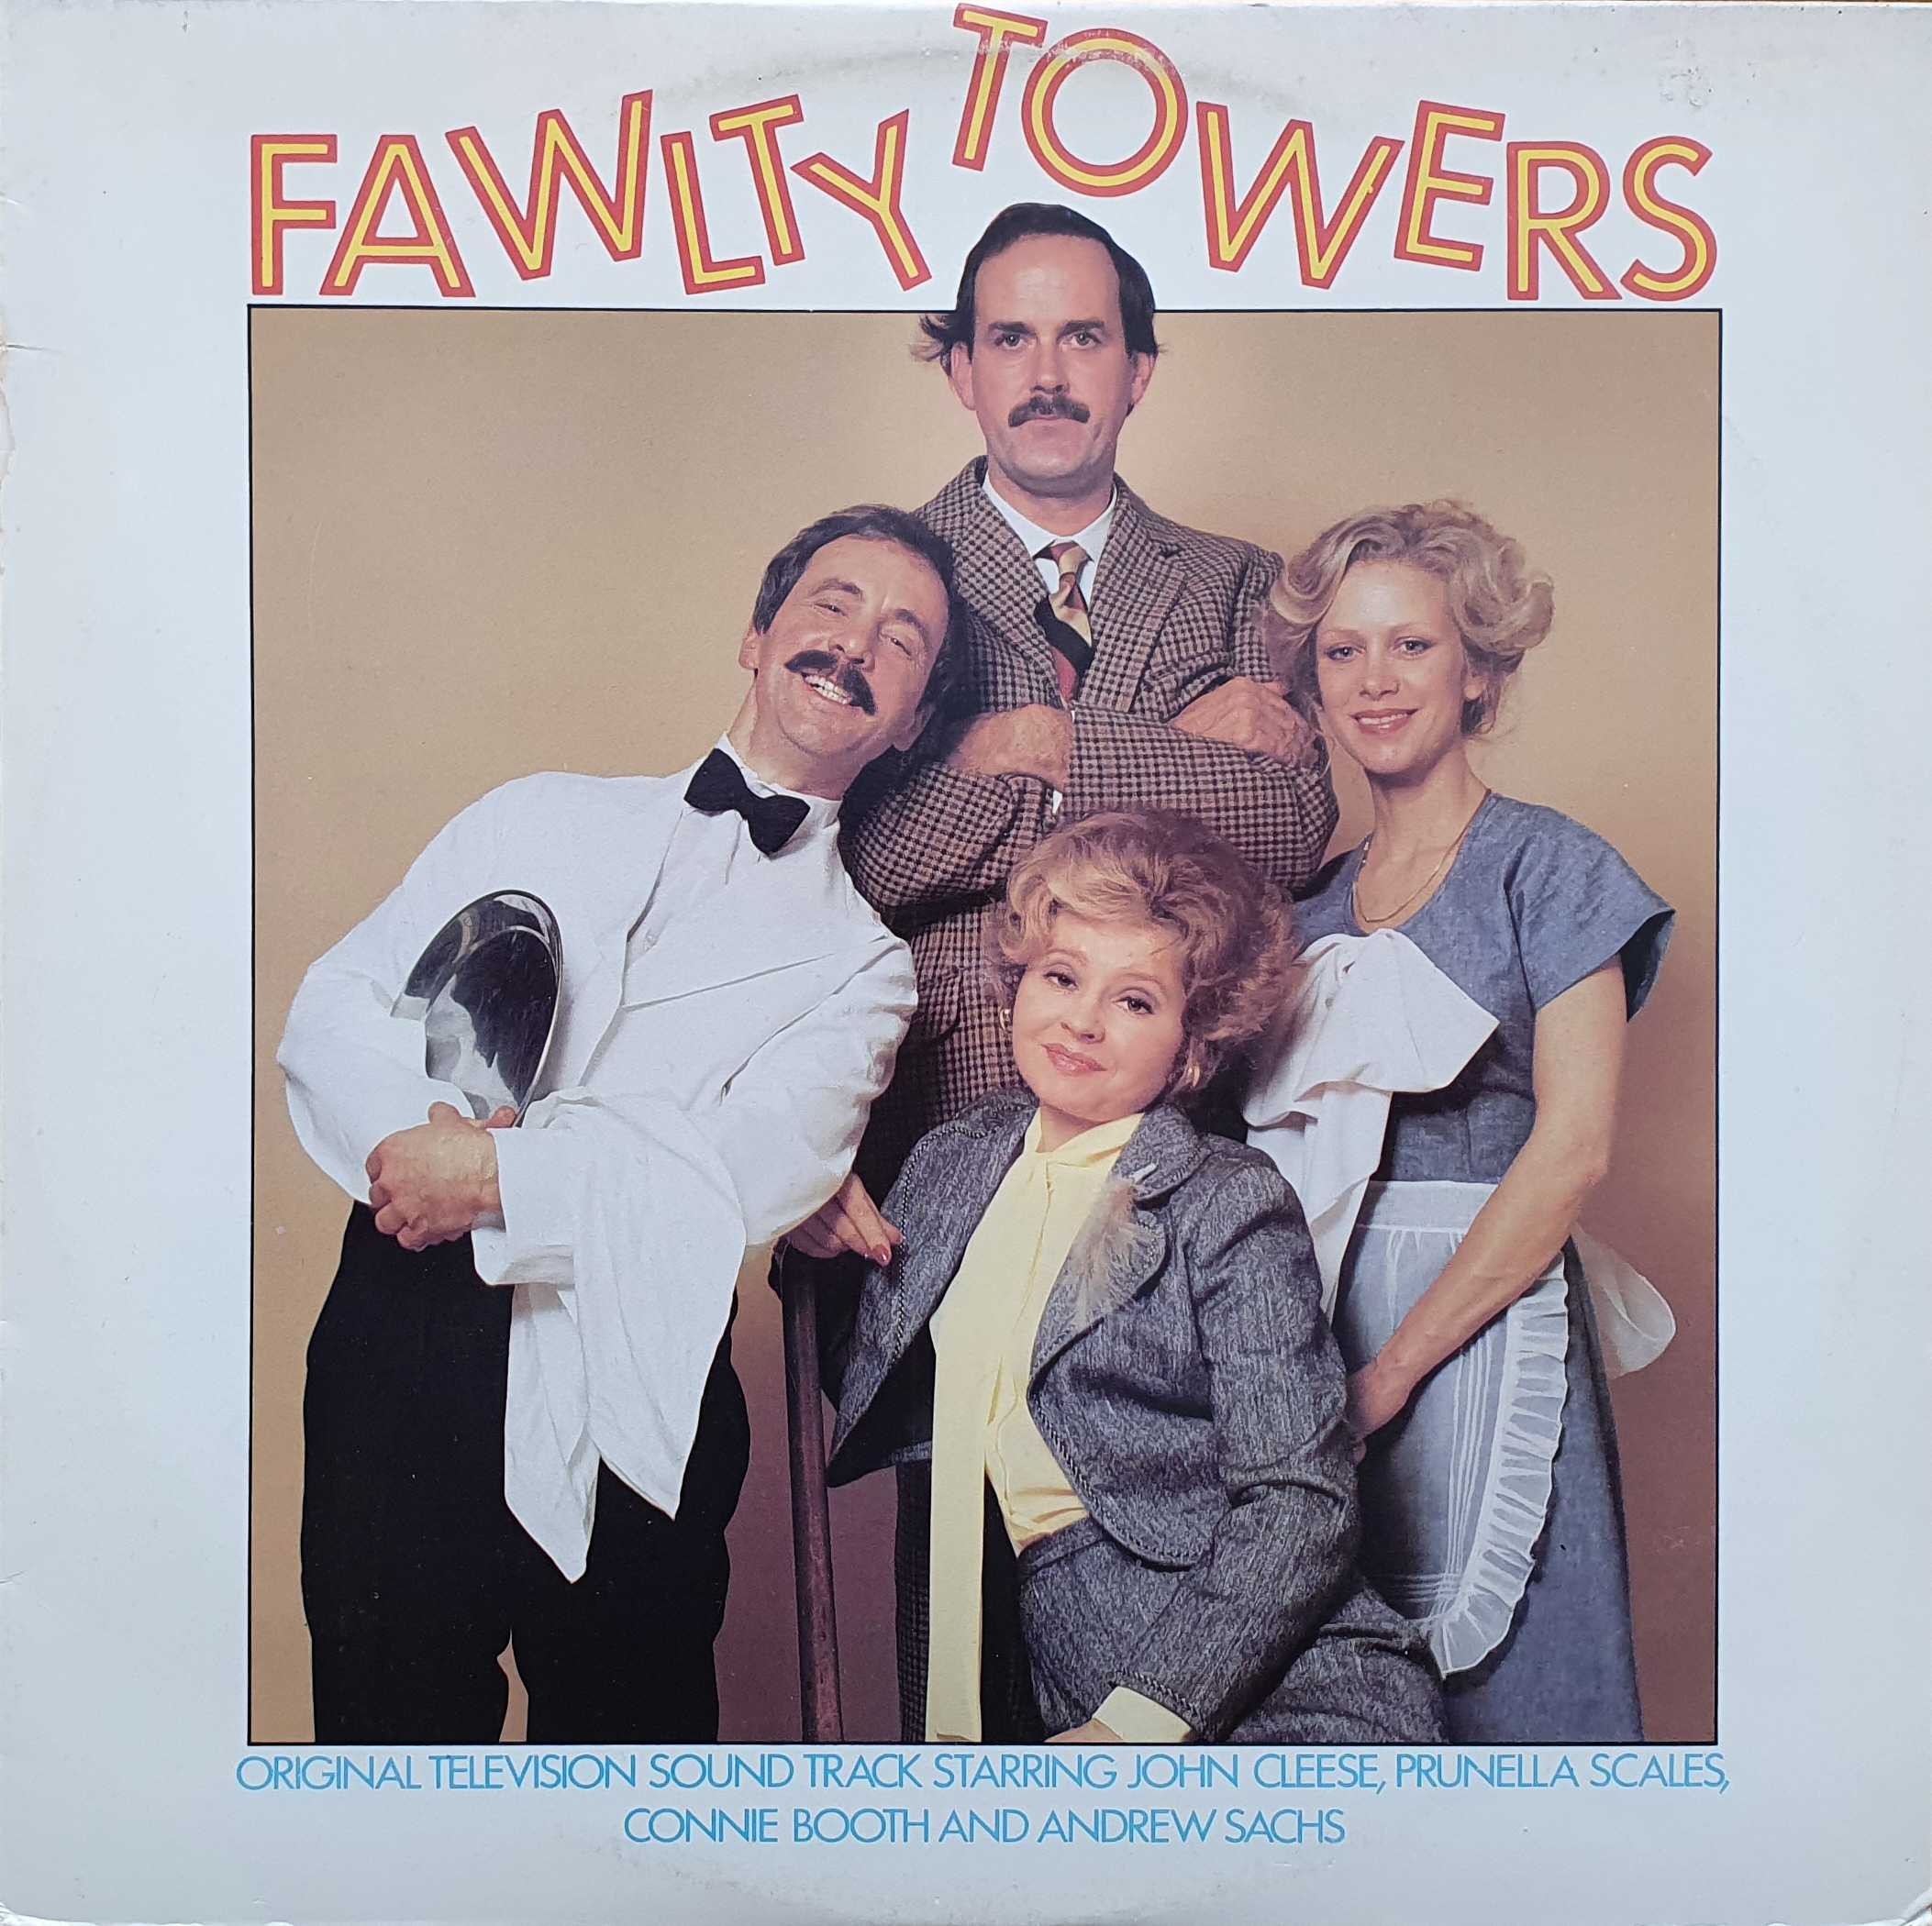 Picture of Fawlty Towers by artist John Cleese / Connie Booth from the BBC albums - Records and Tapes library